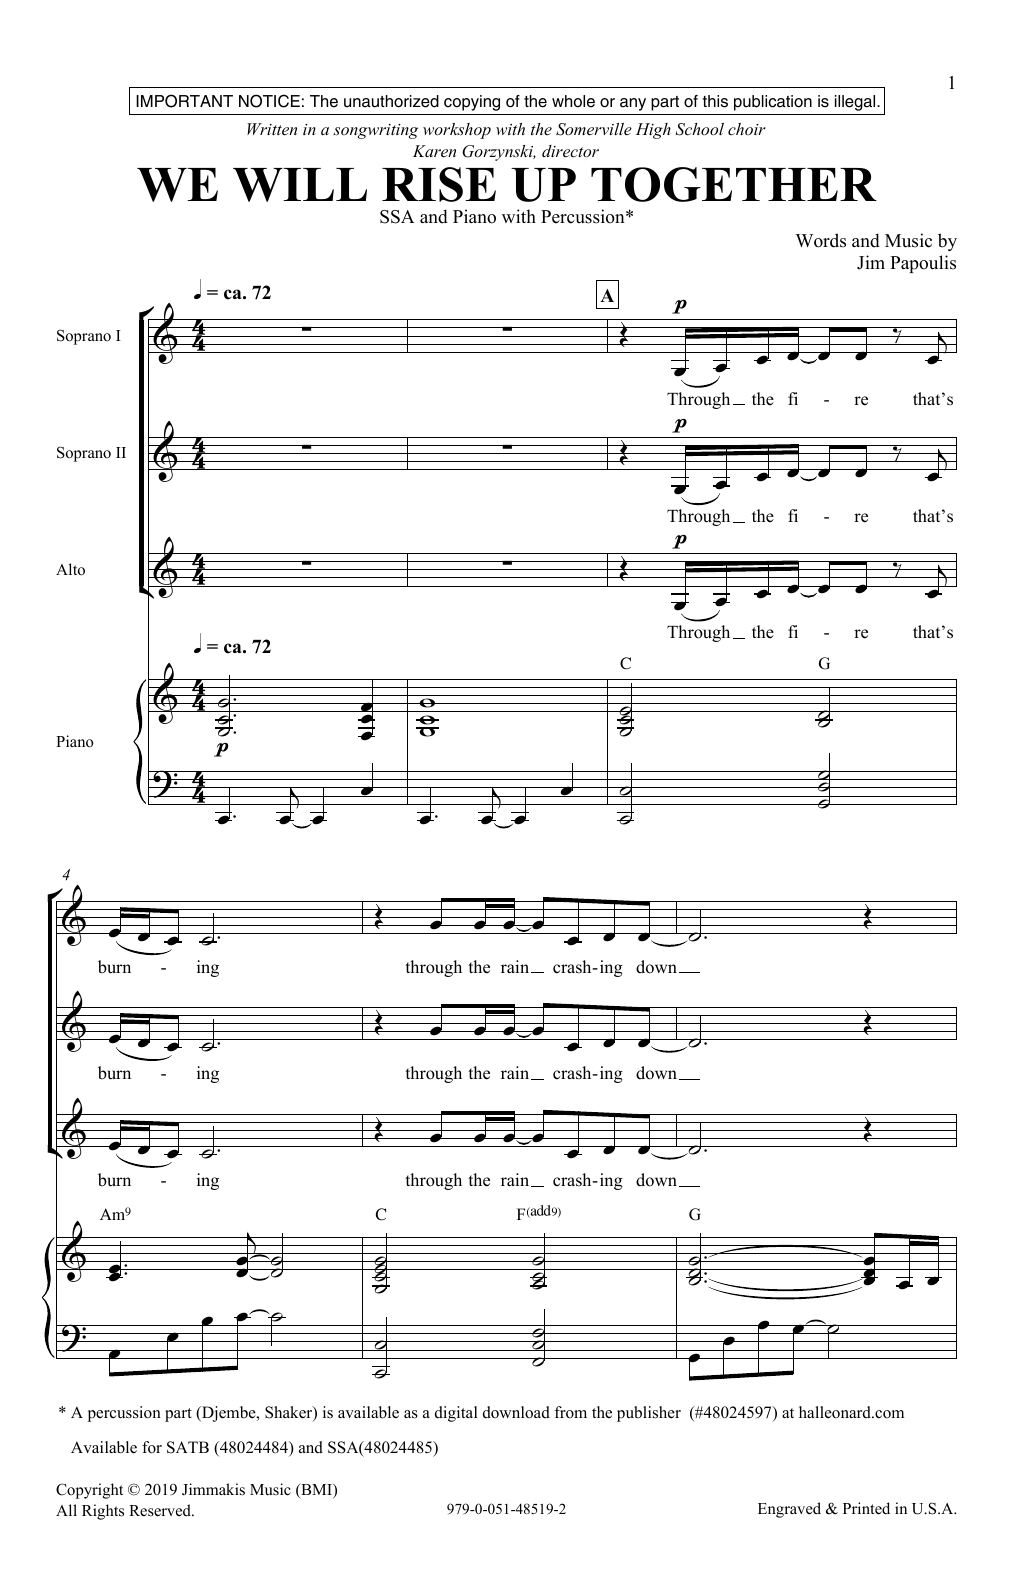 Download Jim Papoulis We Will Rise Up Together Sheet Music